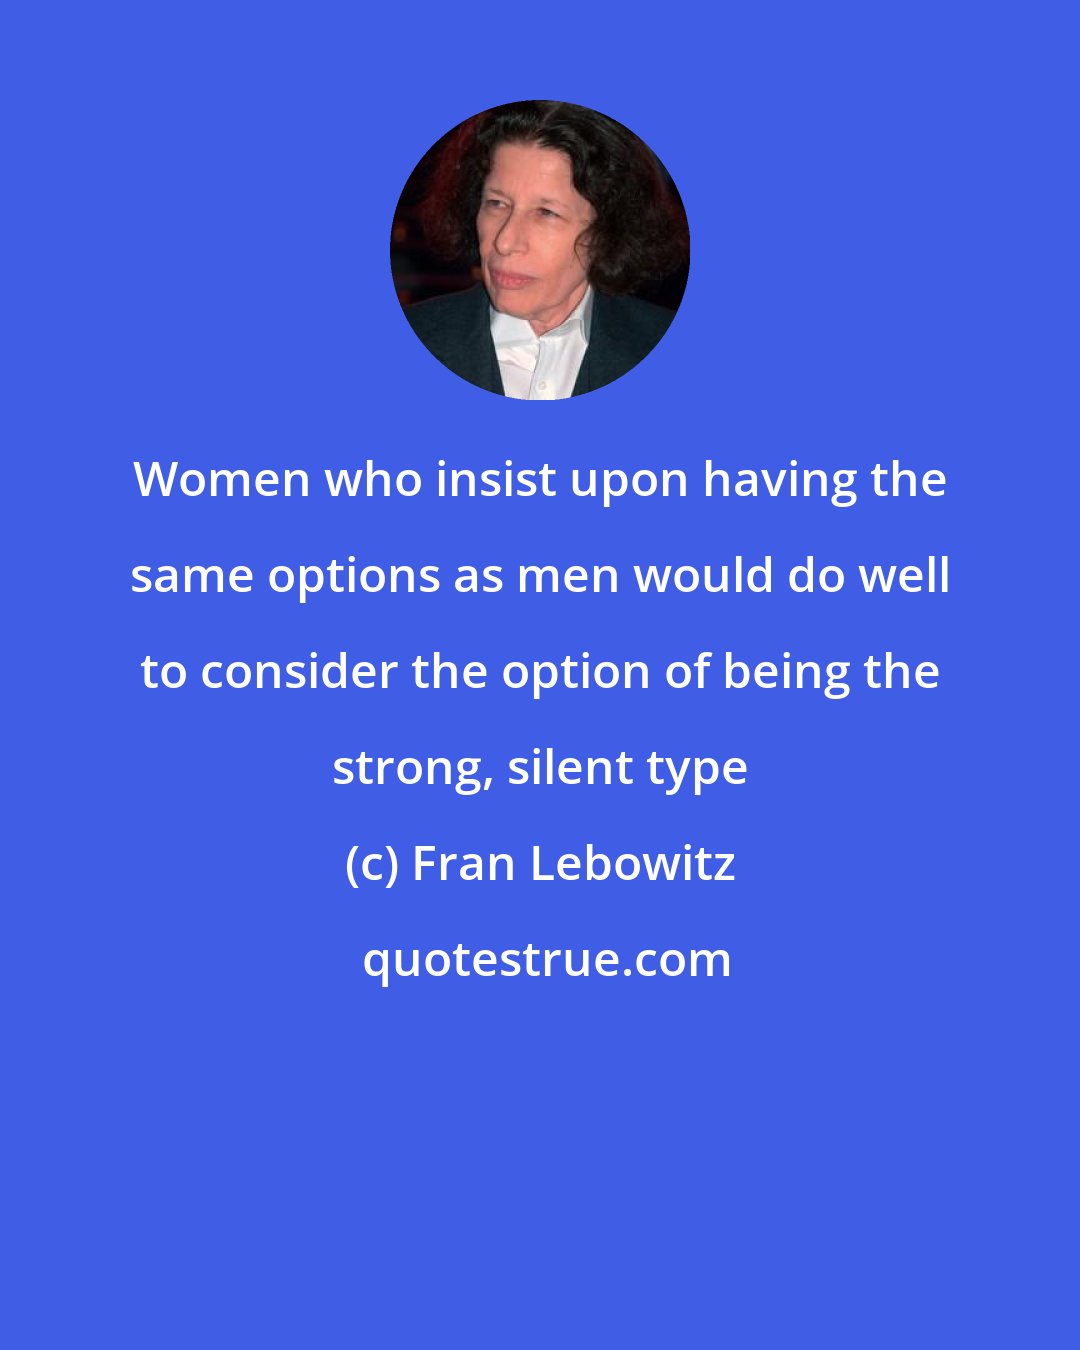 Fran Lebowitz: Women who insist upon having the same options as men would do well to consider the option of being the strong, silent type